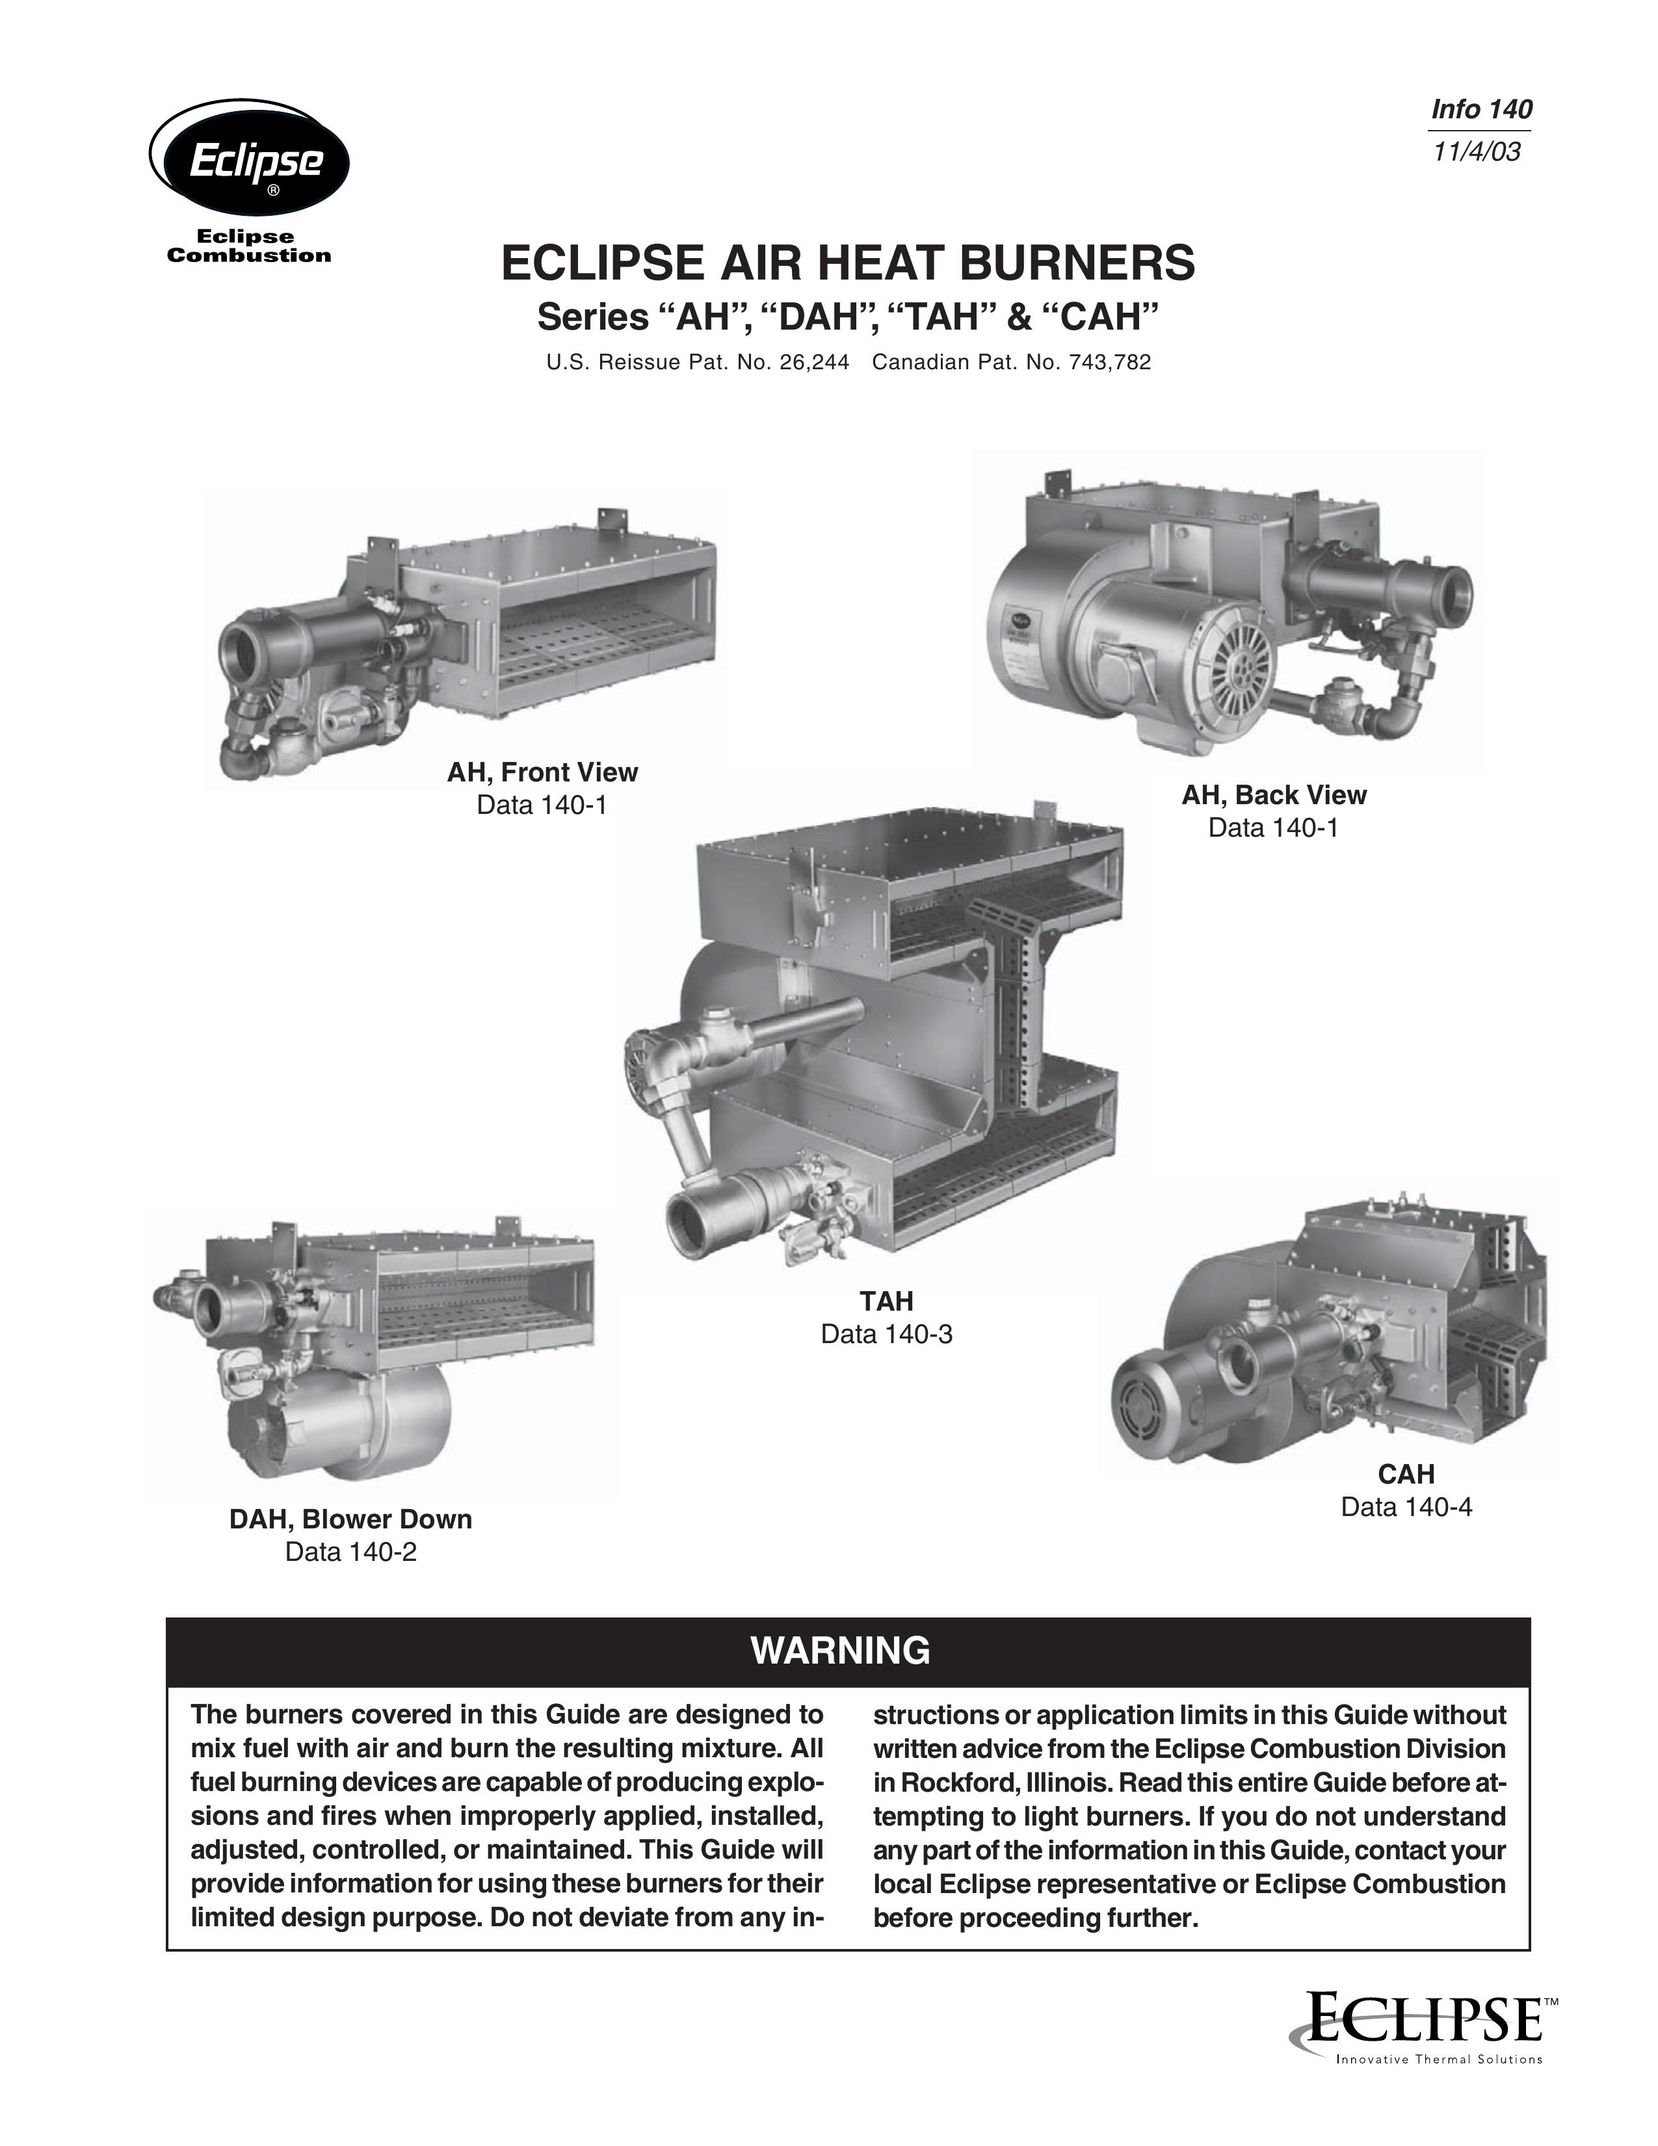 Eclipse Combustion TAH Air Conditioner User Manual